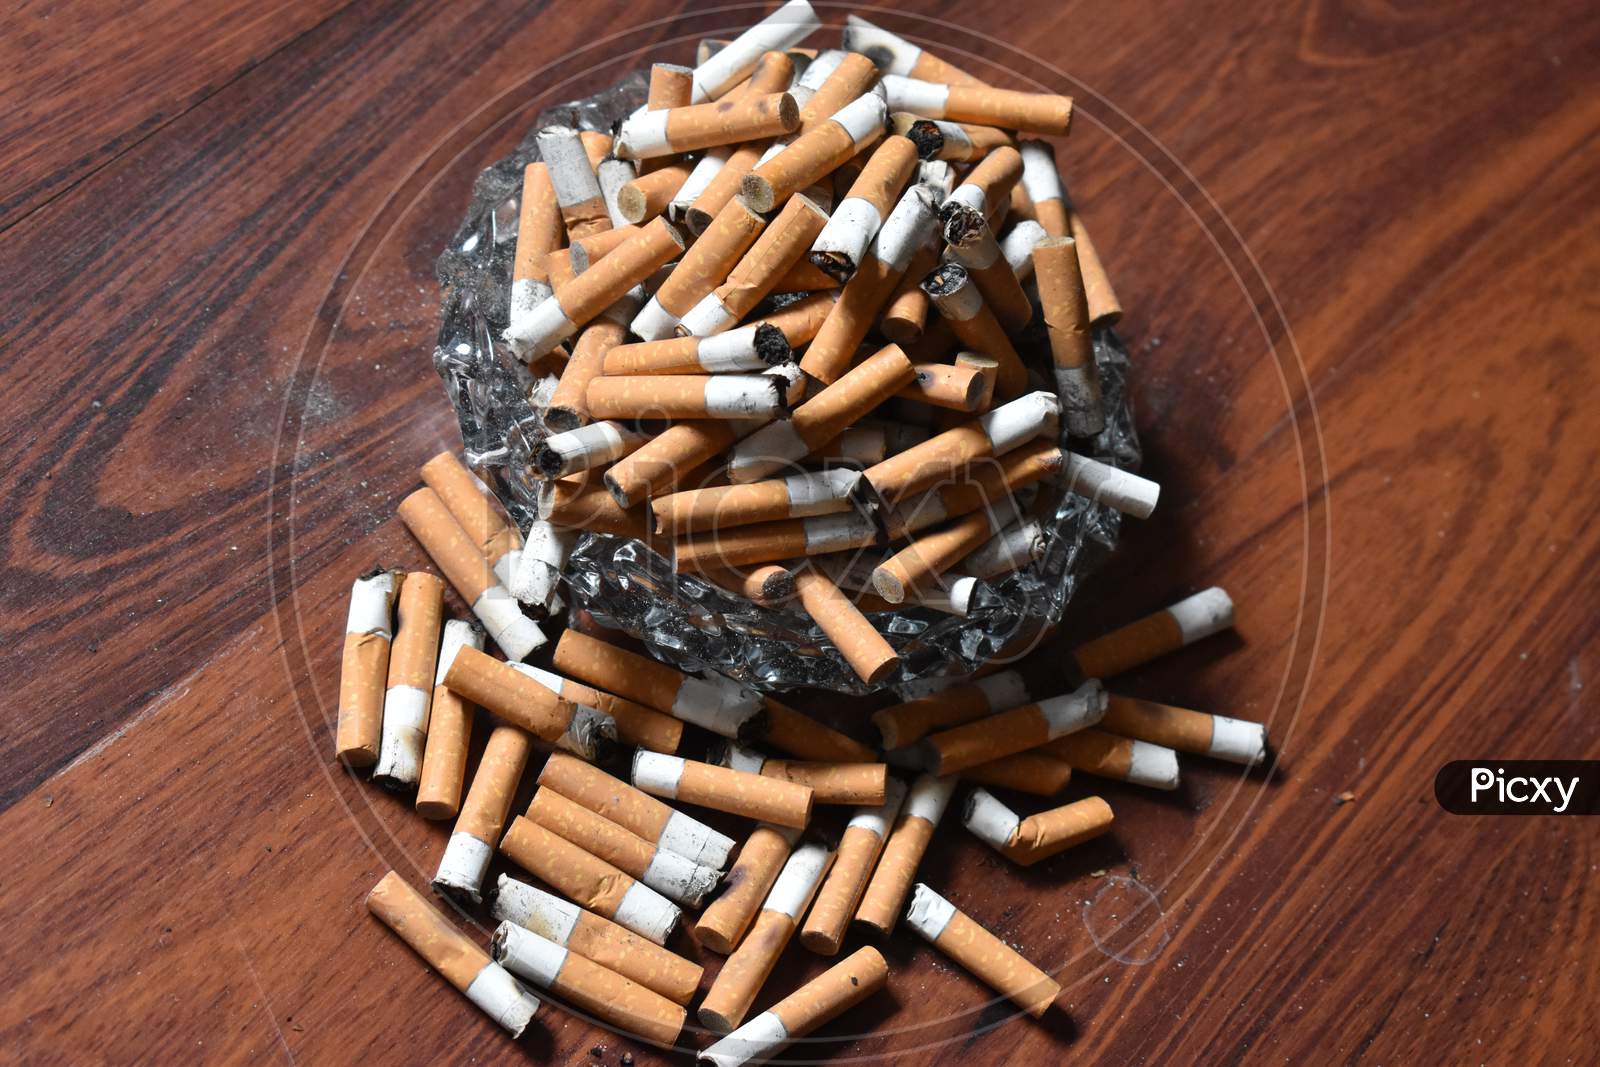 Used cigarettes in an ashtray